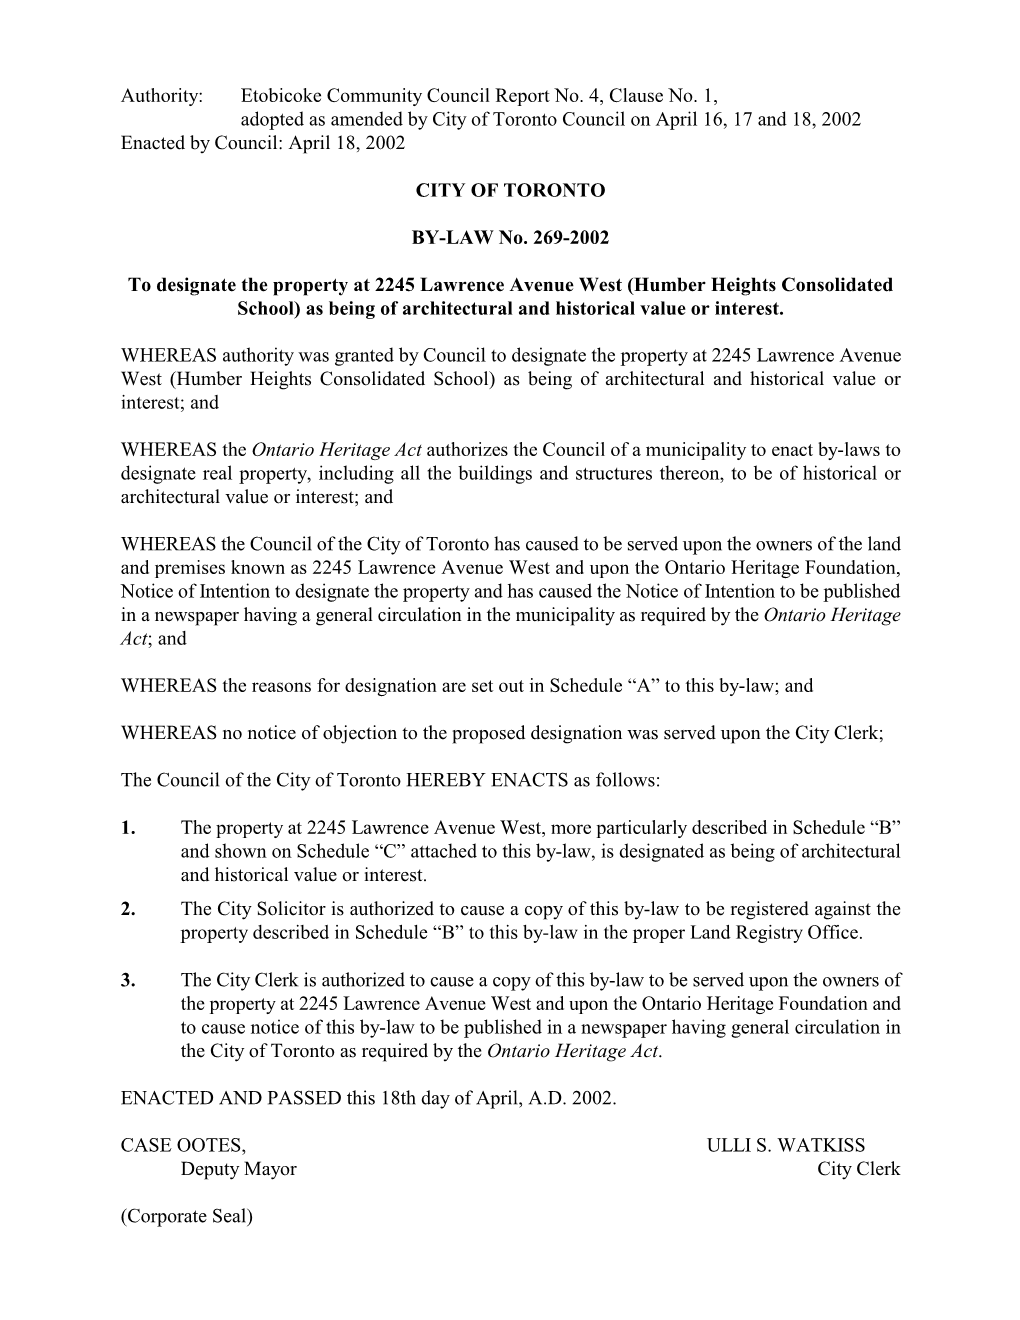 Etobicoke Community Council Report No. 4, Clause No. 1, Adopted As Amended by City of Toronto Council on April 16, 17 and 18, 2002 Enacted by Council: April 18, 2002